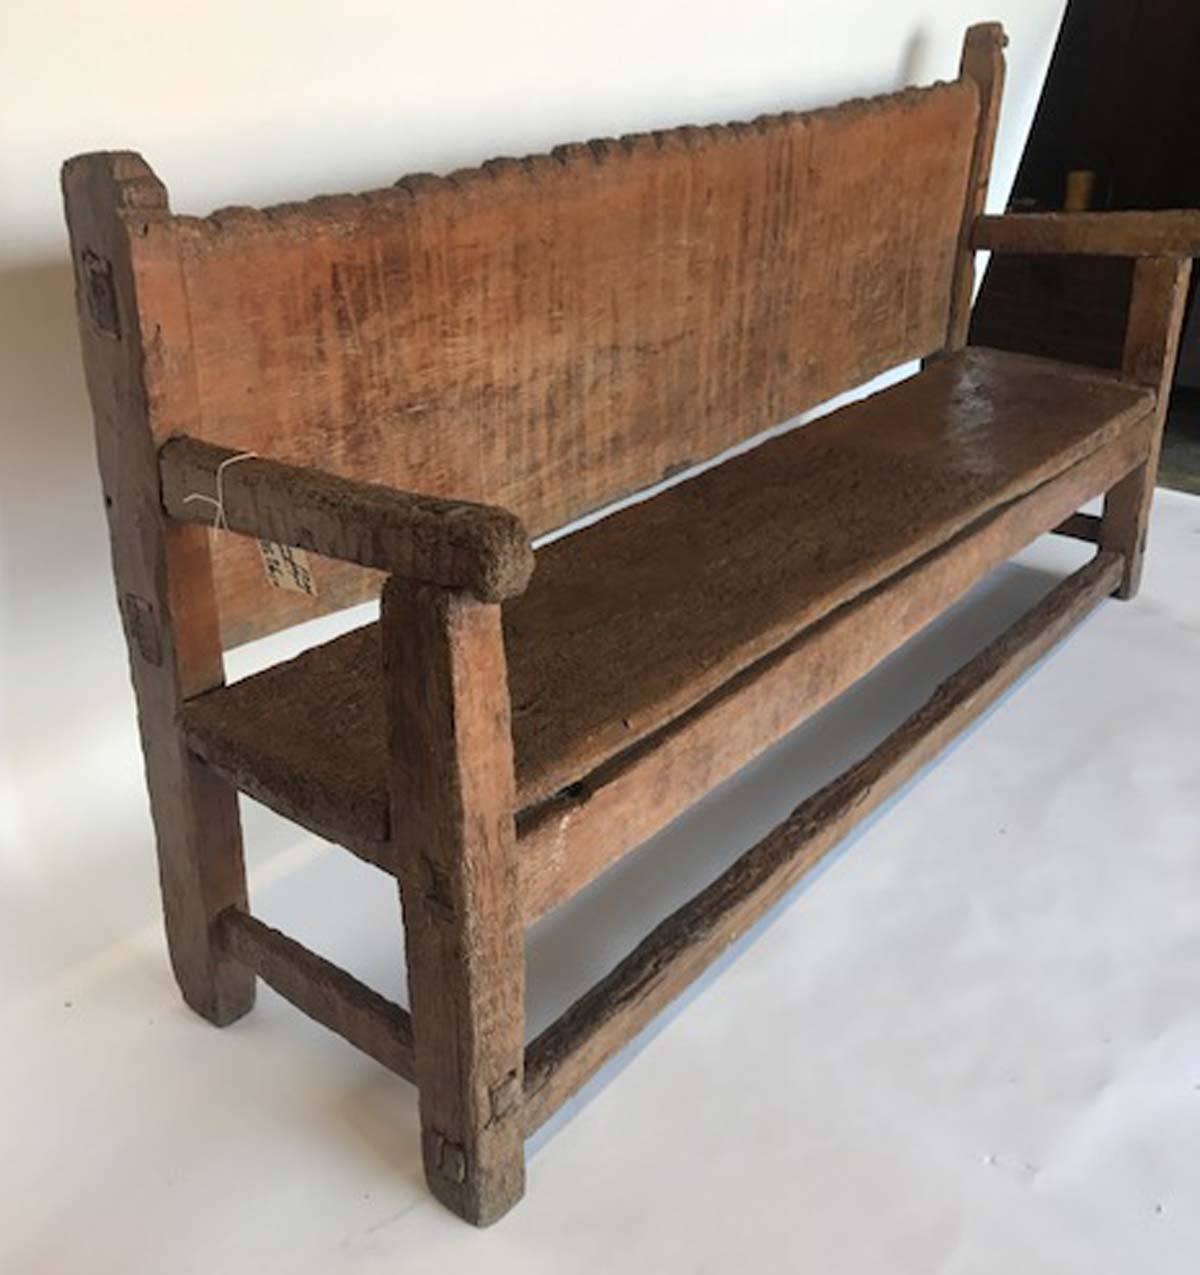 Rustic and Primitive Chajul bench from Guatemala. Back and seat consists of one wide board, hand hewn. Mortise and tenon construction and carved back. Old but sturdy!